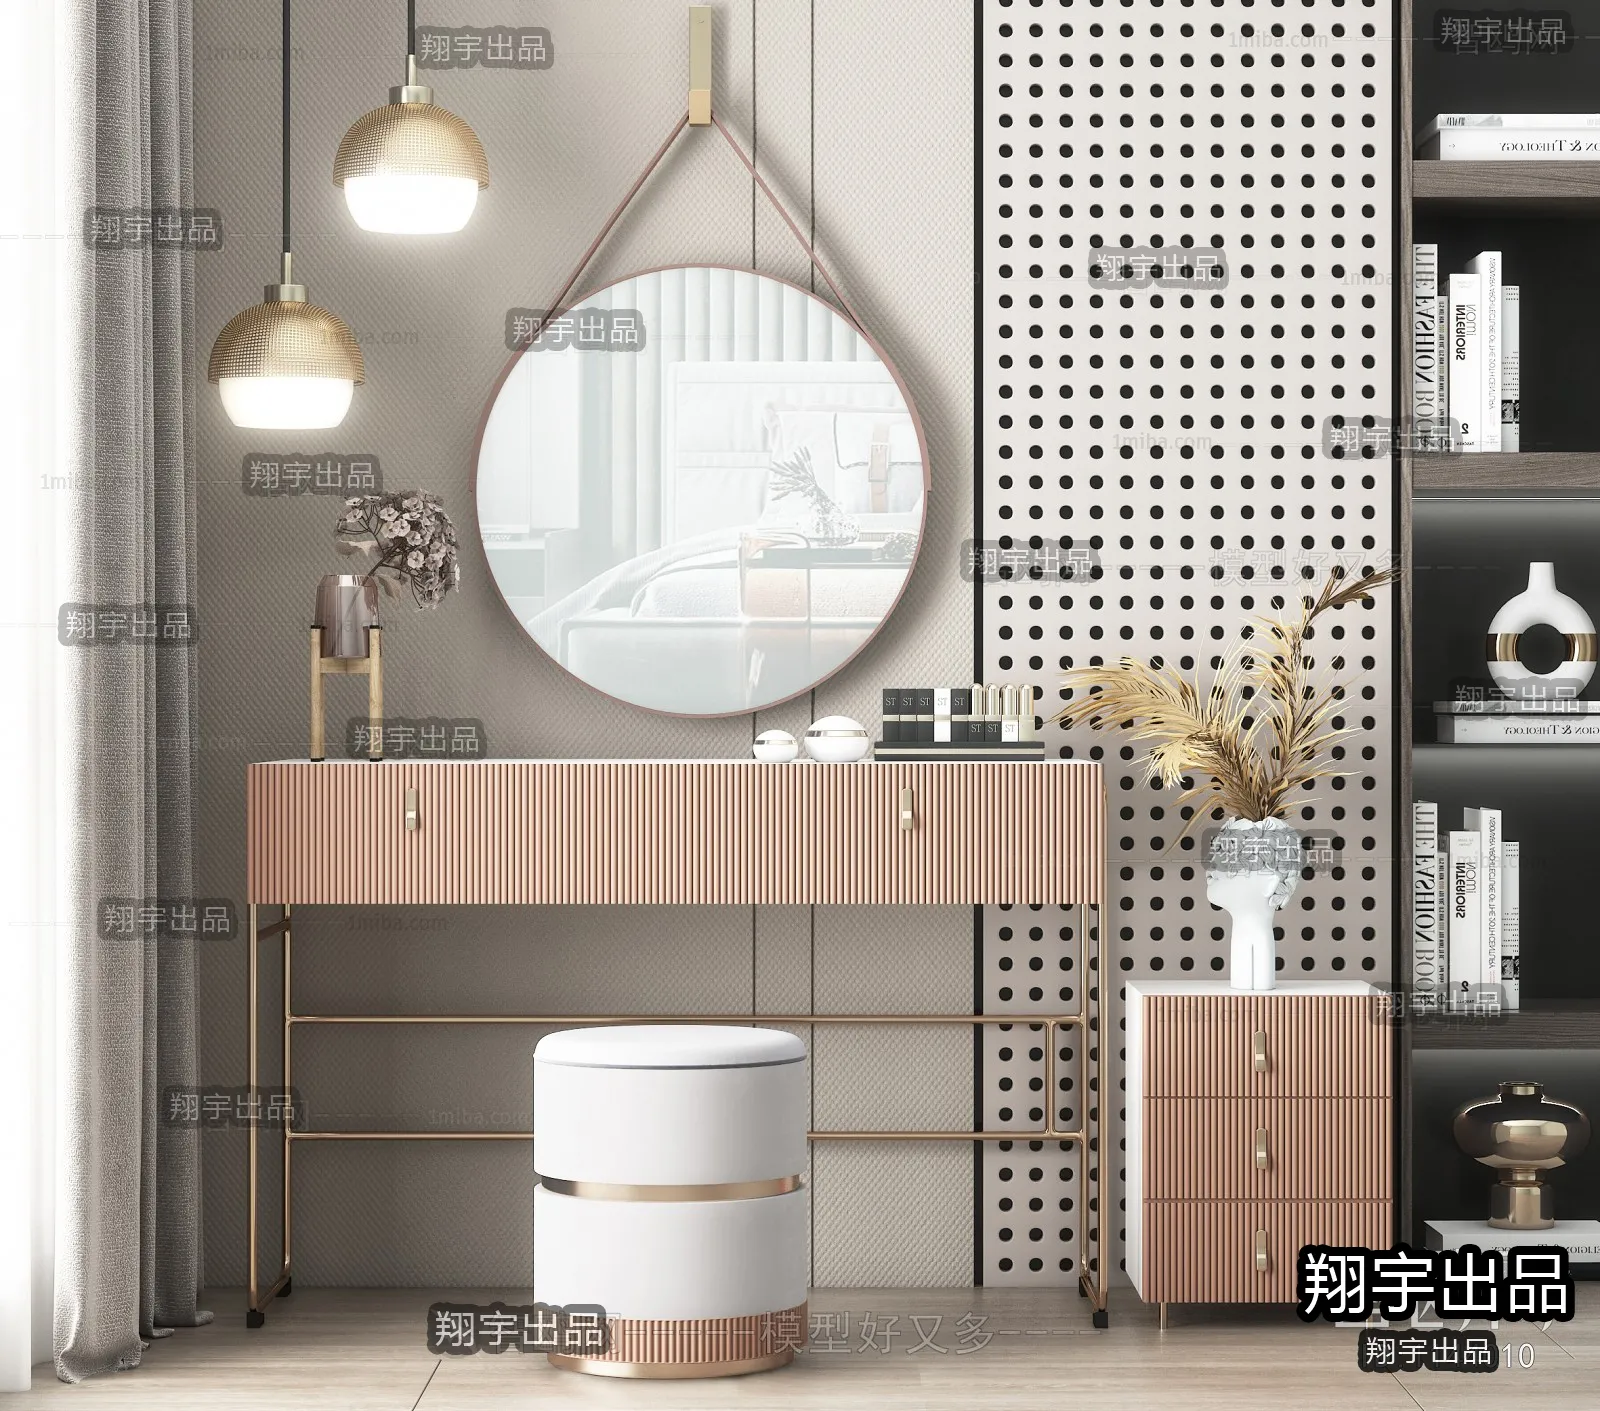 DRESSING TABLE – A7 – FURNITURE 3D MODELS 2022 (VRAY)